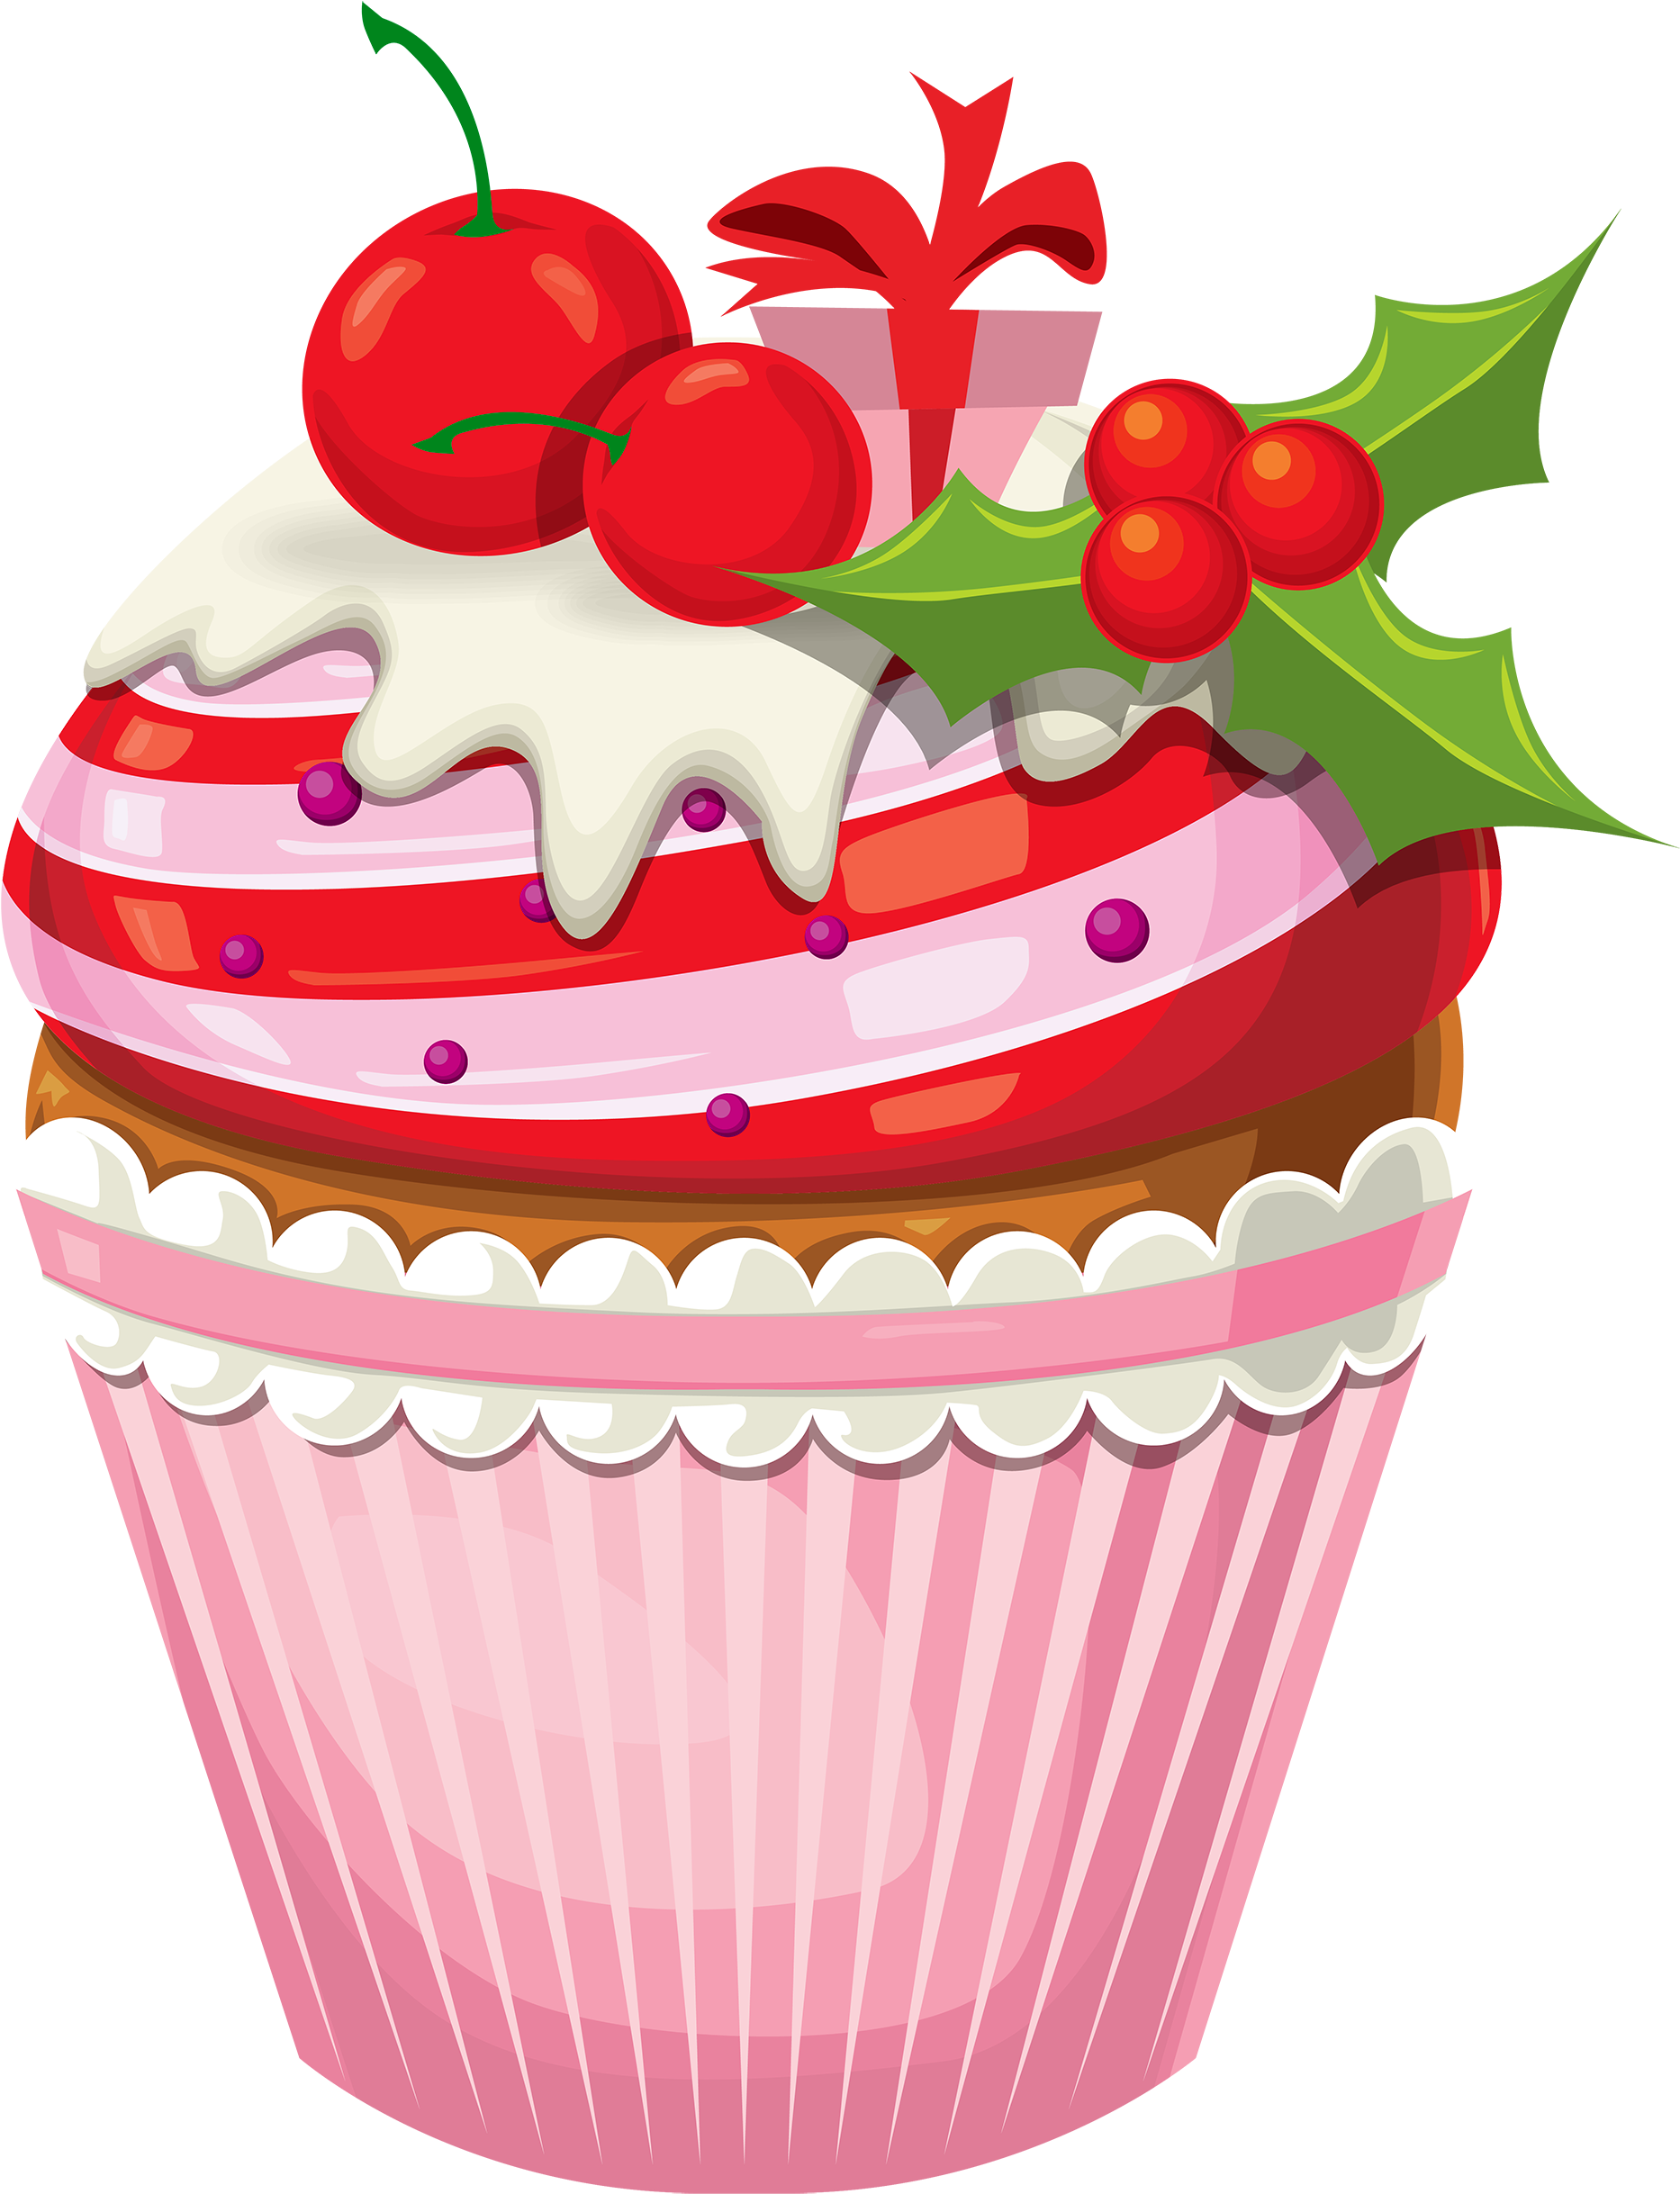 Pin By Courtney Patterson On Clip Art Cakes, Cupcakes,pies - Cupcakes Png Clipart (1915x2500)